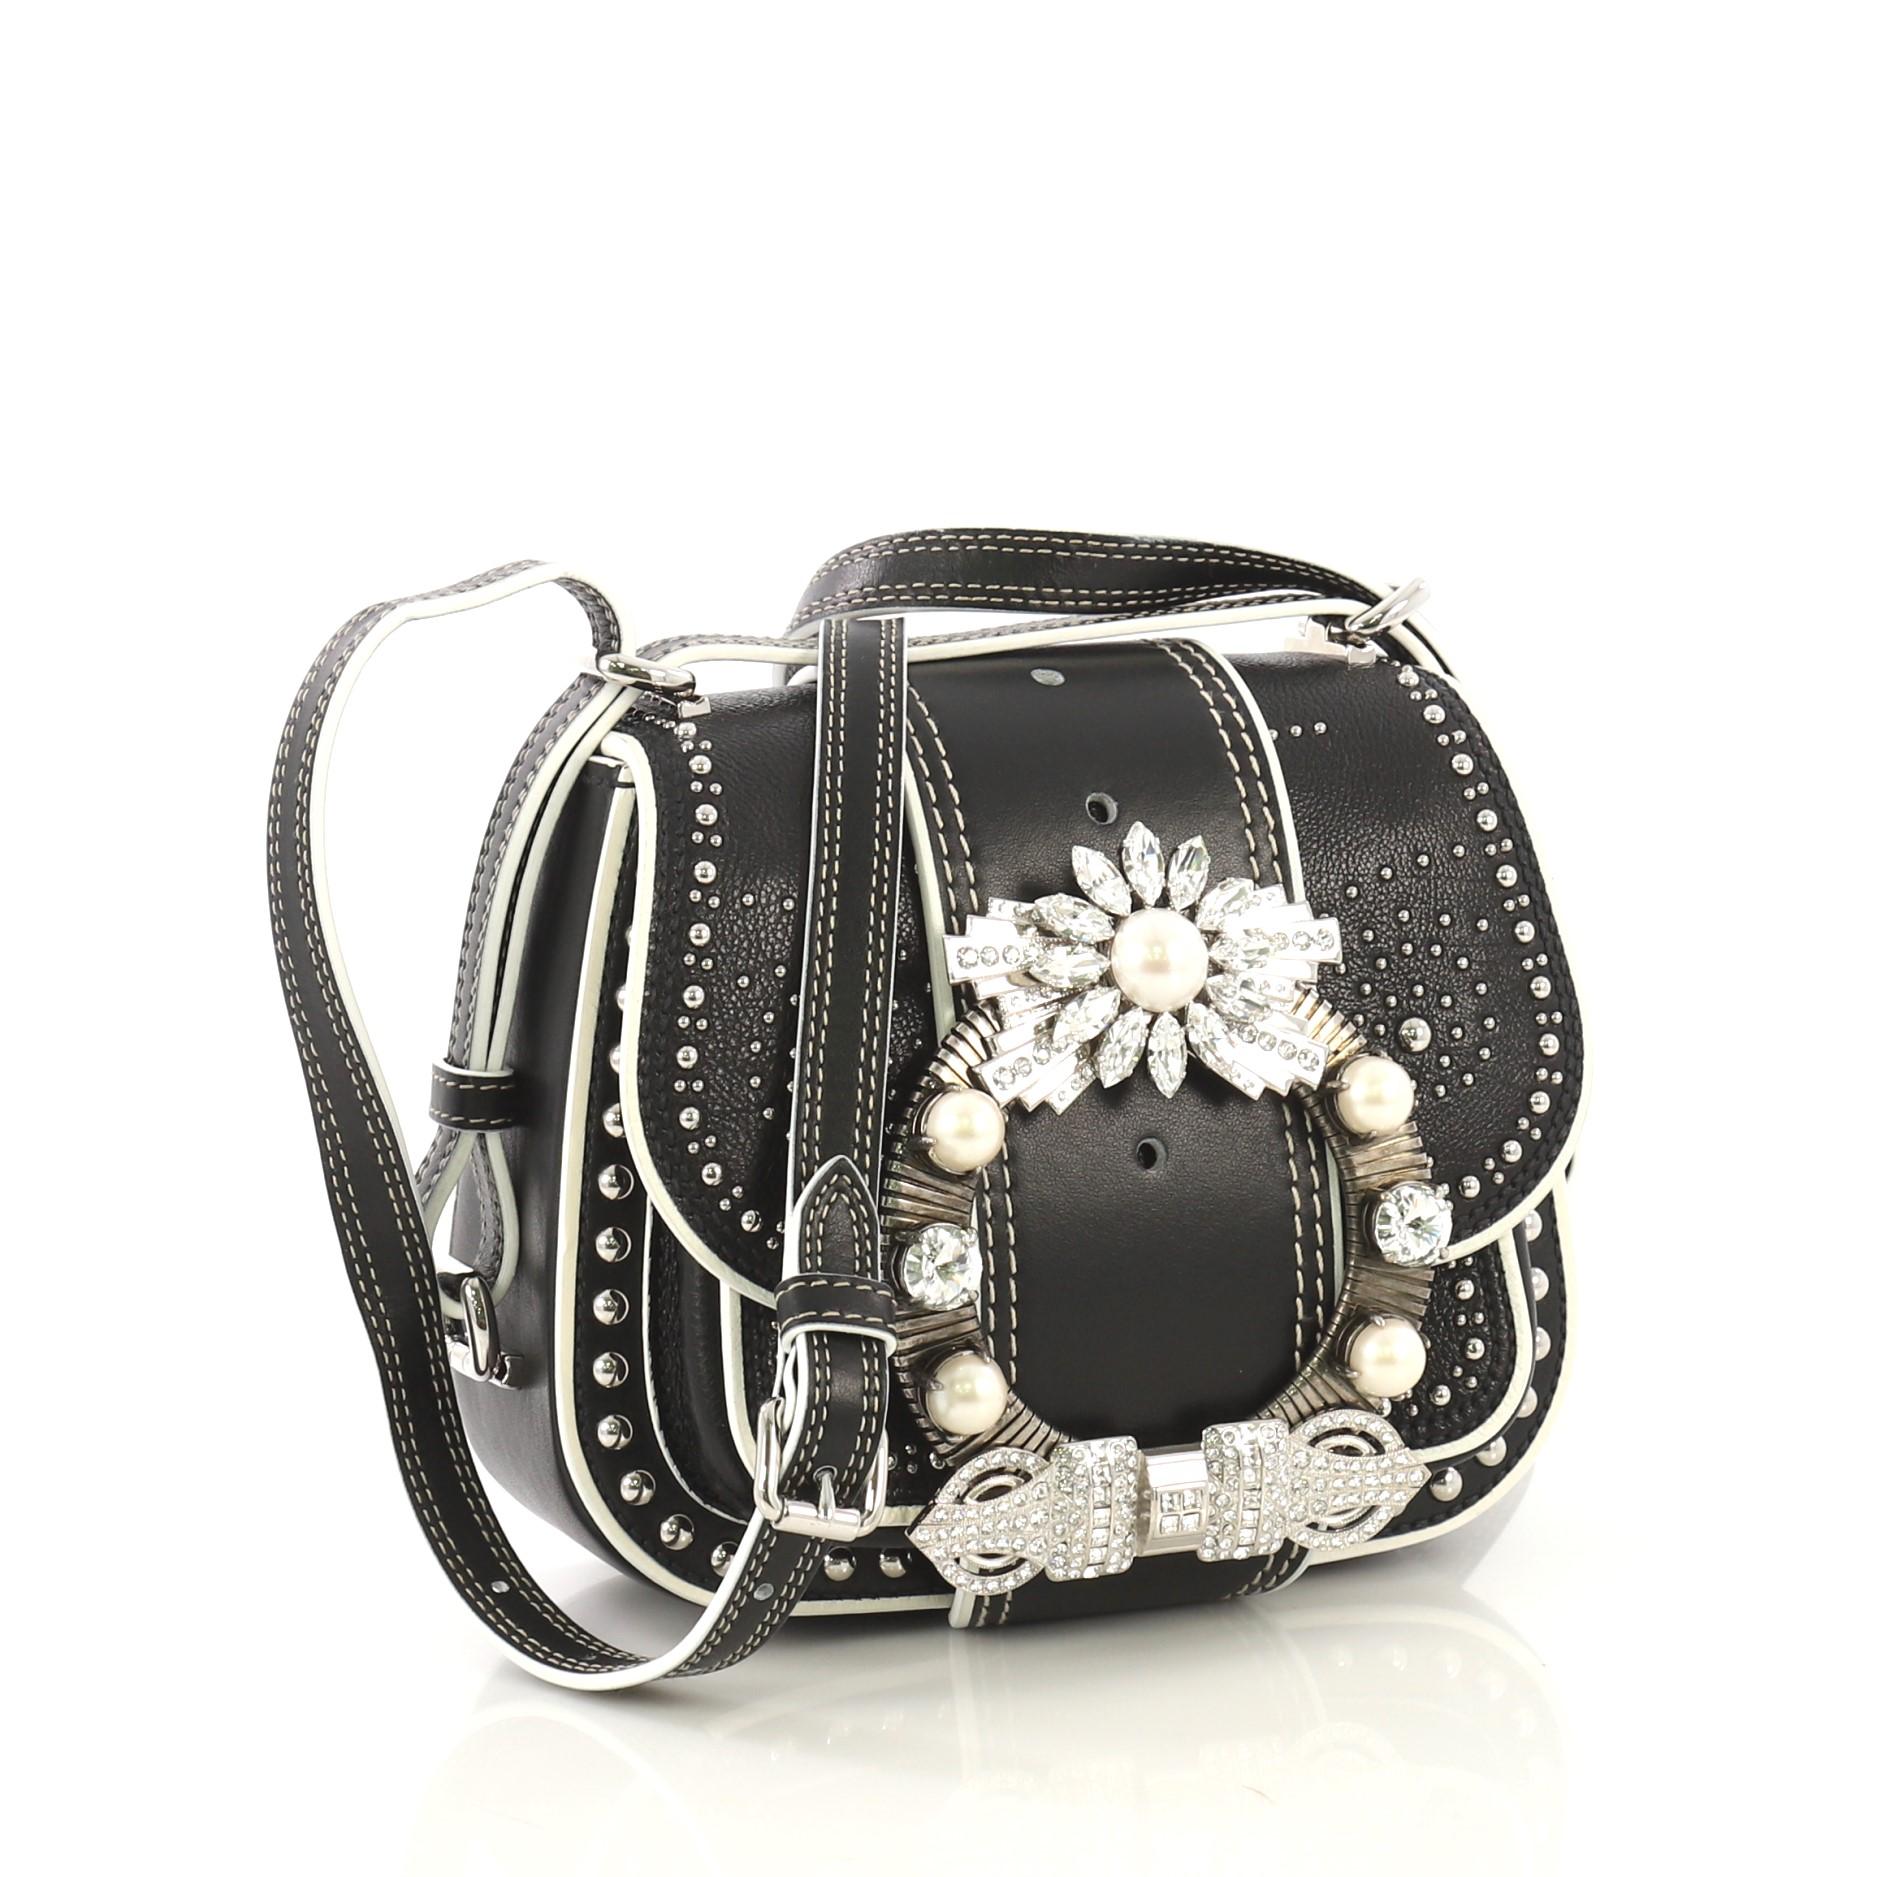 This Miu Miu Dahlia Crossbody Bag Crystal Embellished Leather Small, crafted from black leather, features an adjustable leather shoulder strap, front and back metal studs, front flap with decorative crystal embellishments, and silver-tone hardware.